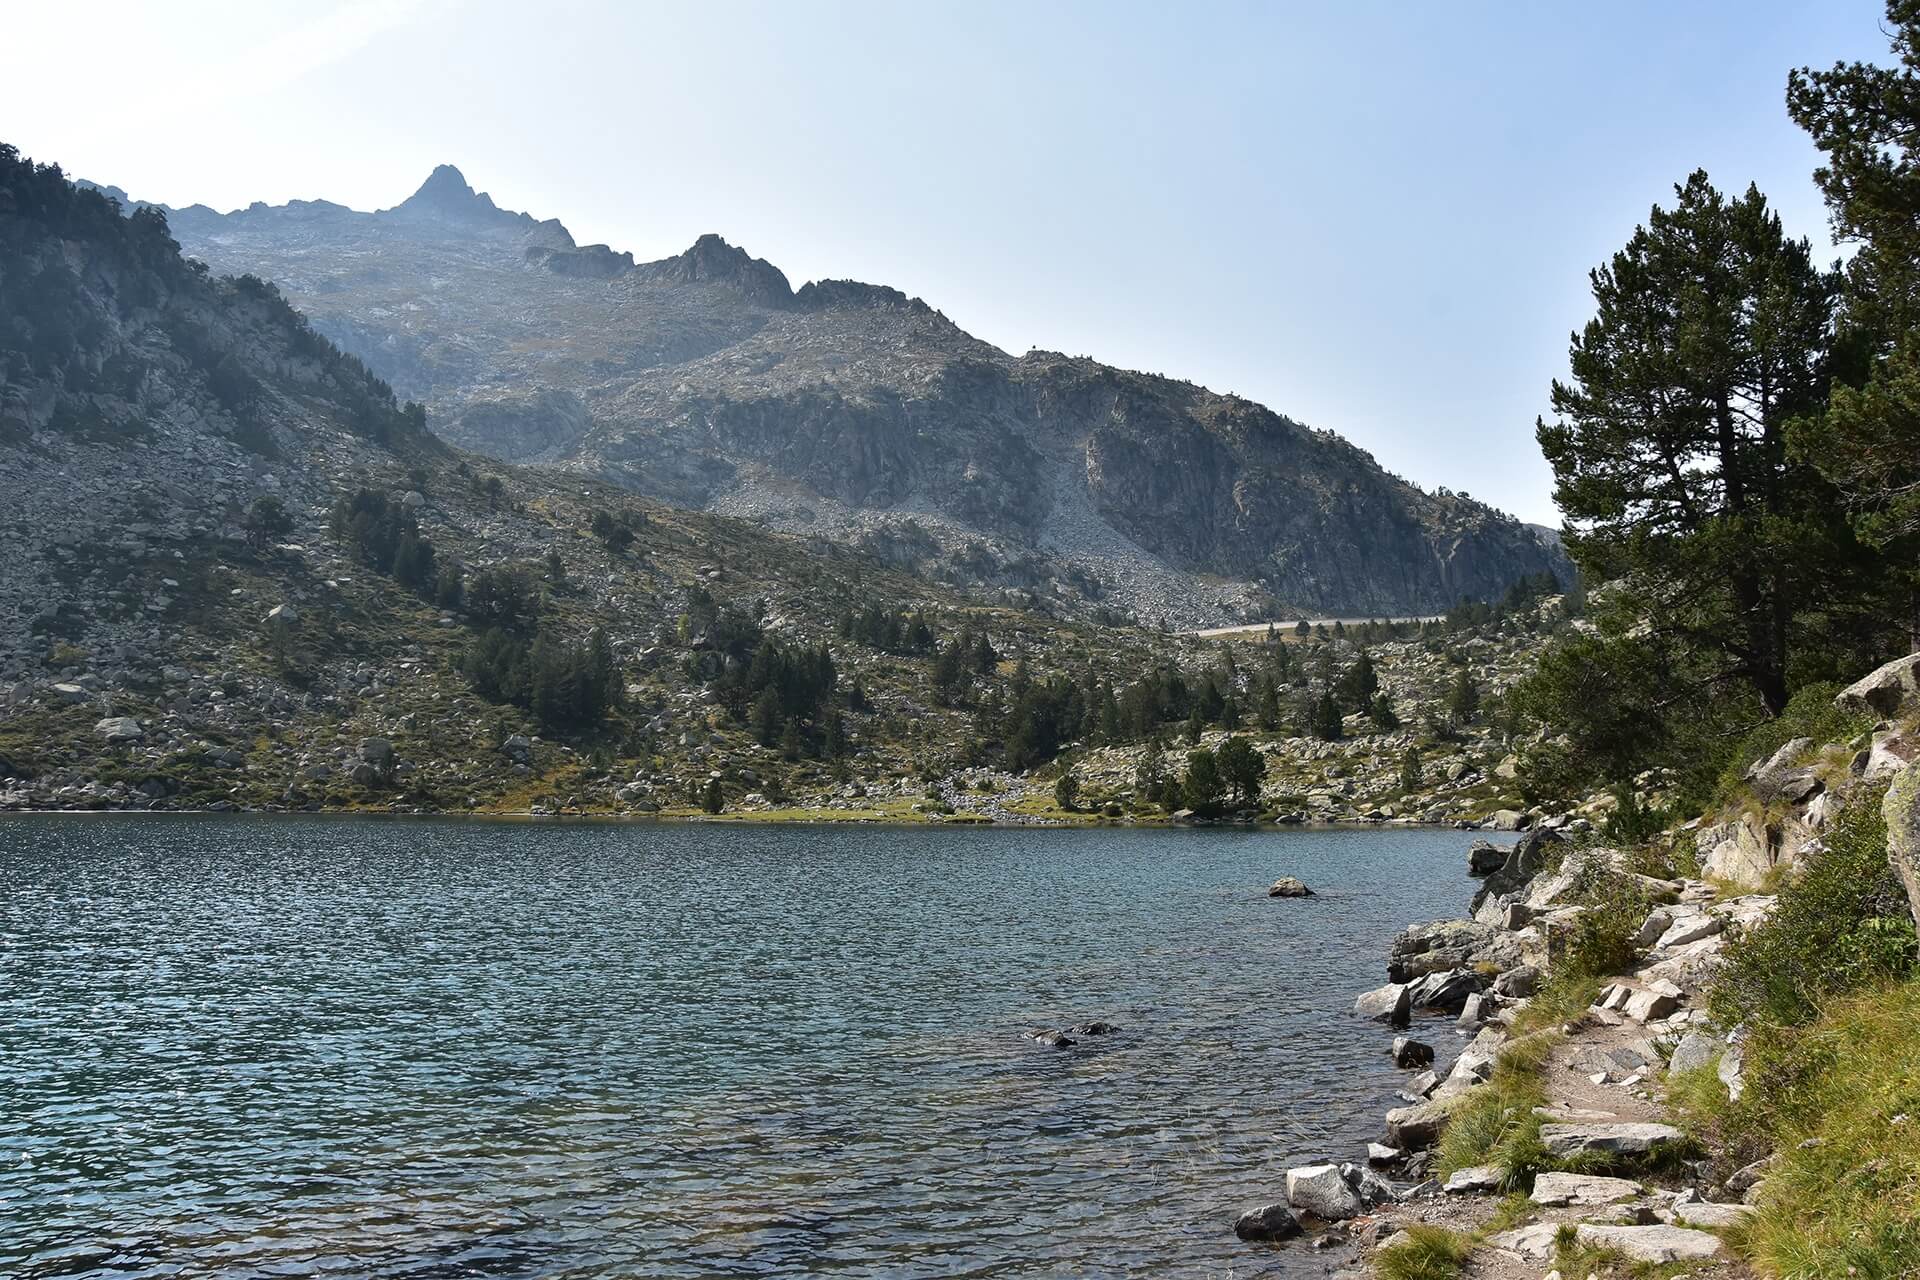 Last part of the Oredon, Aubert, and Aumar lakes hike in French Pyrenees